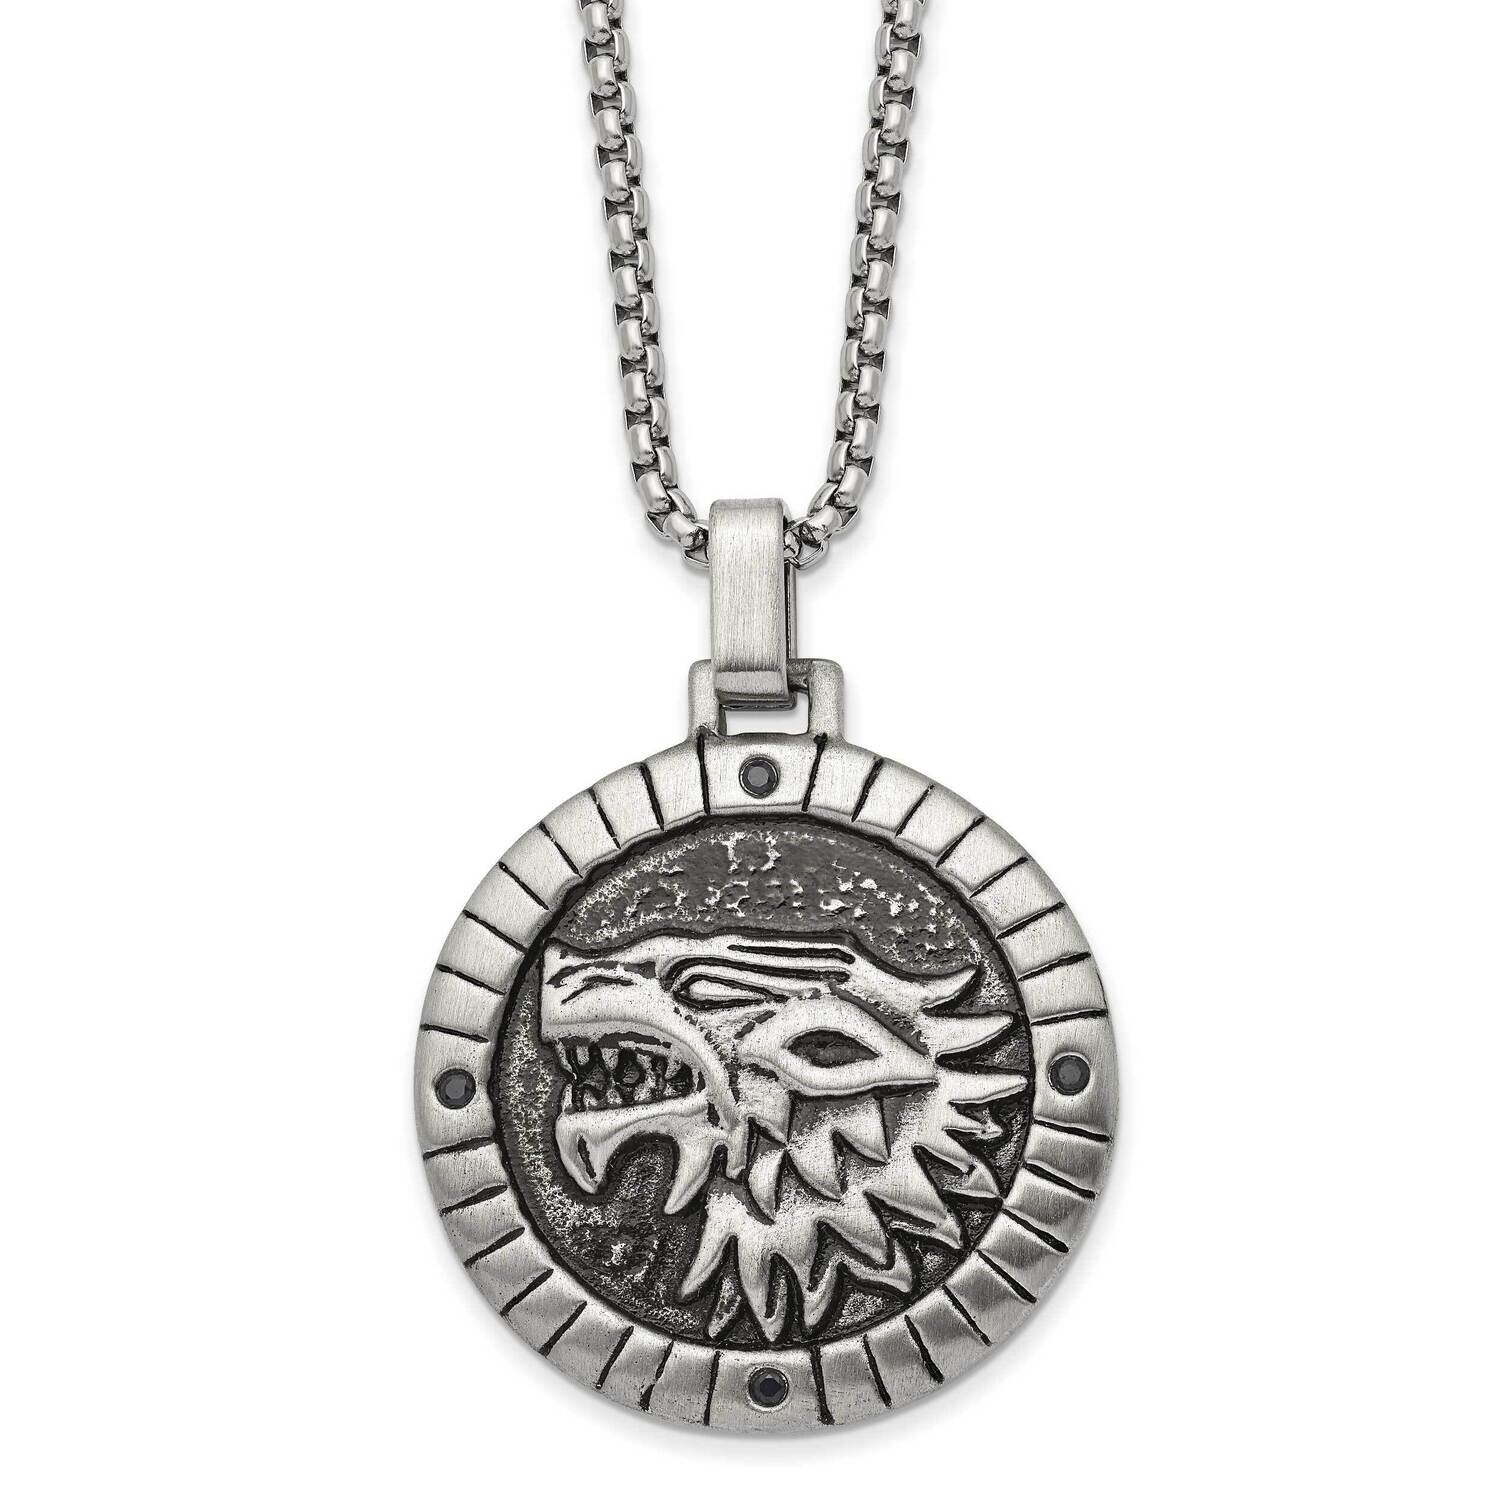 Antiqued Gun Metal Ip-Plated with CZ Diamond Chimera 24 Inch Necklace Stainless Steel SRN2955-24